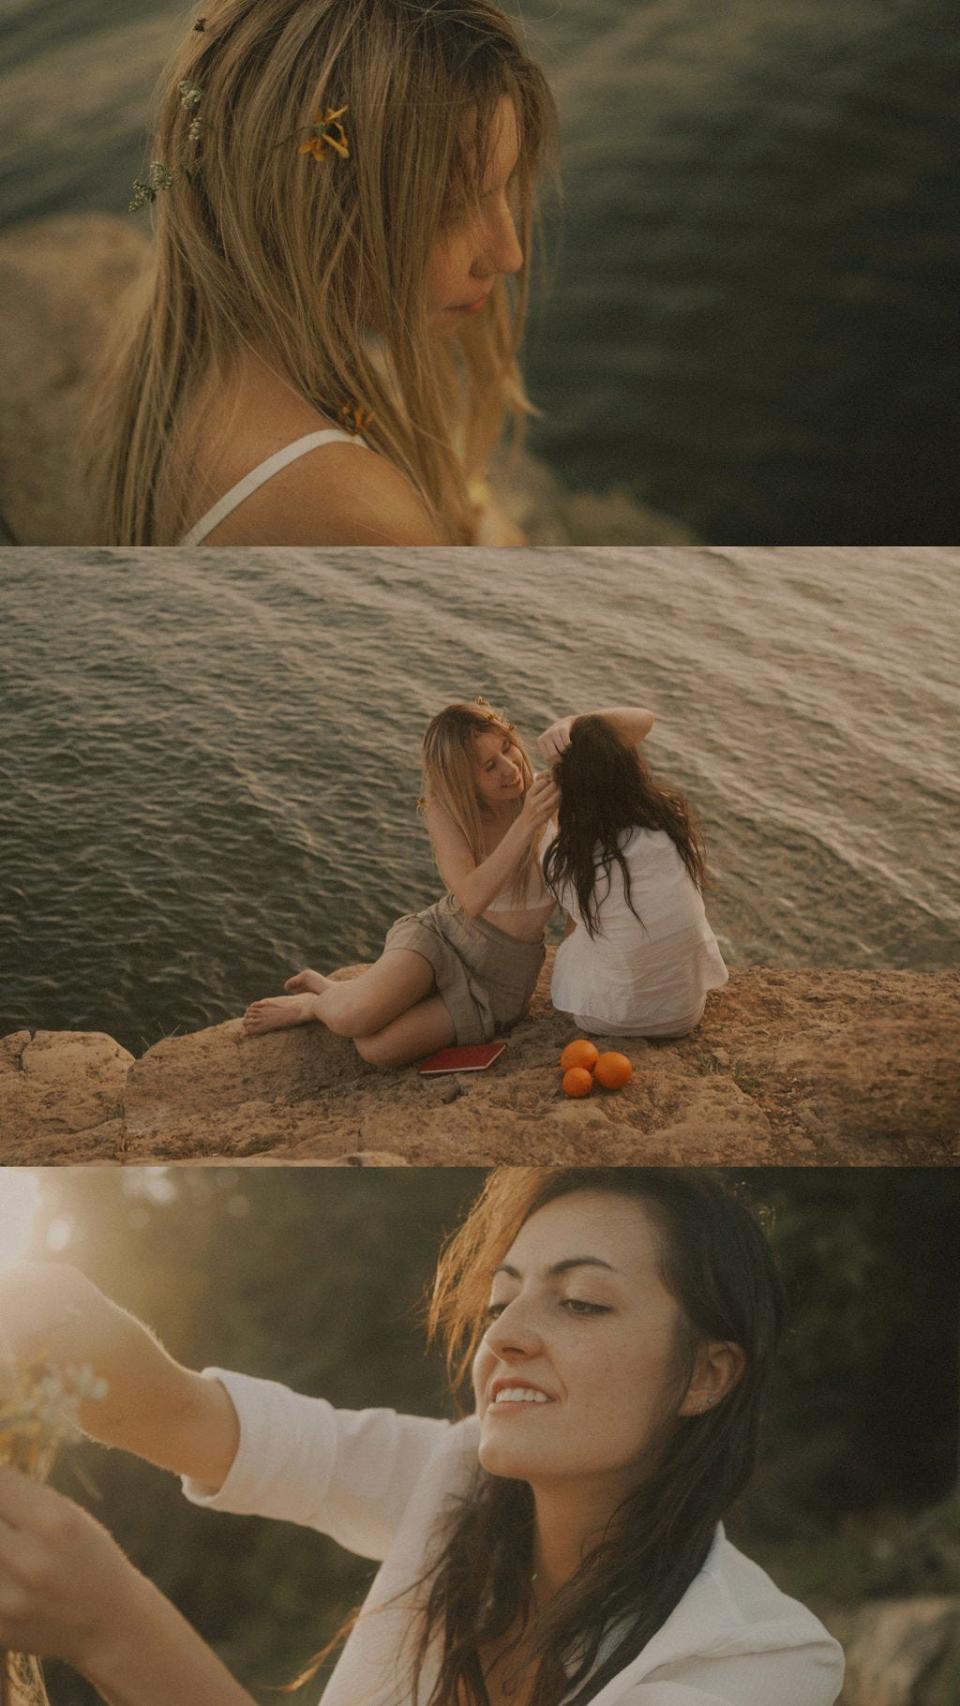 Stills from Citrus Studios' new feature-length film, "Odd Fellows." The film is about two roommates at Odd Fellows Academy, Lucia and Rae, who are interested in breaking free from its constraints.